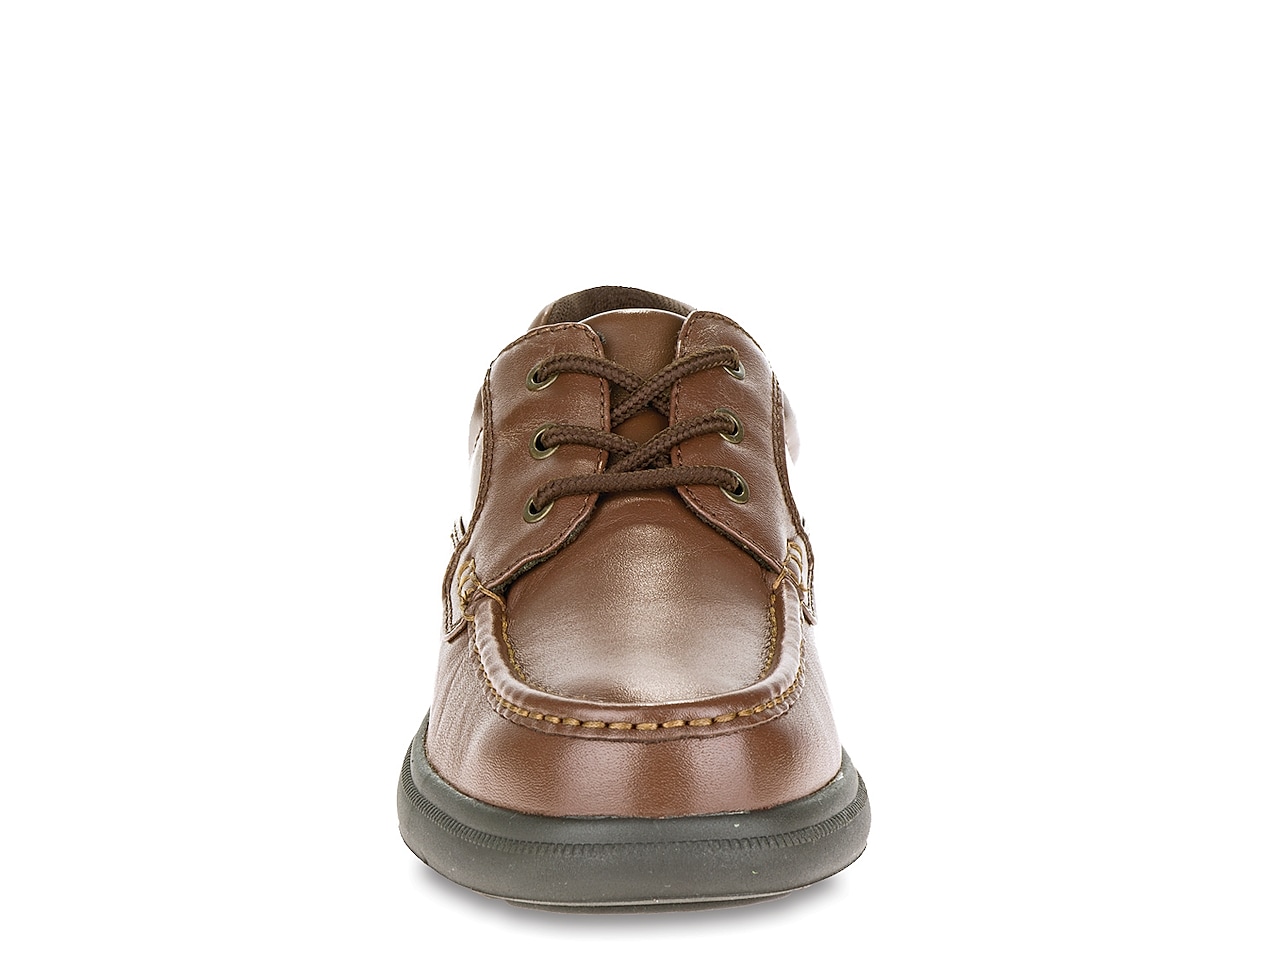 Hush Puppies Gus Oxford | DSW